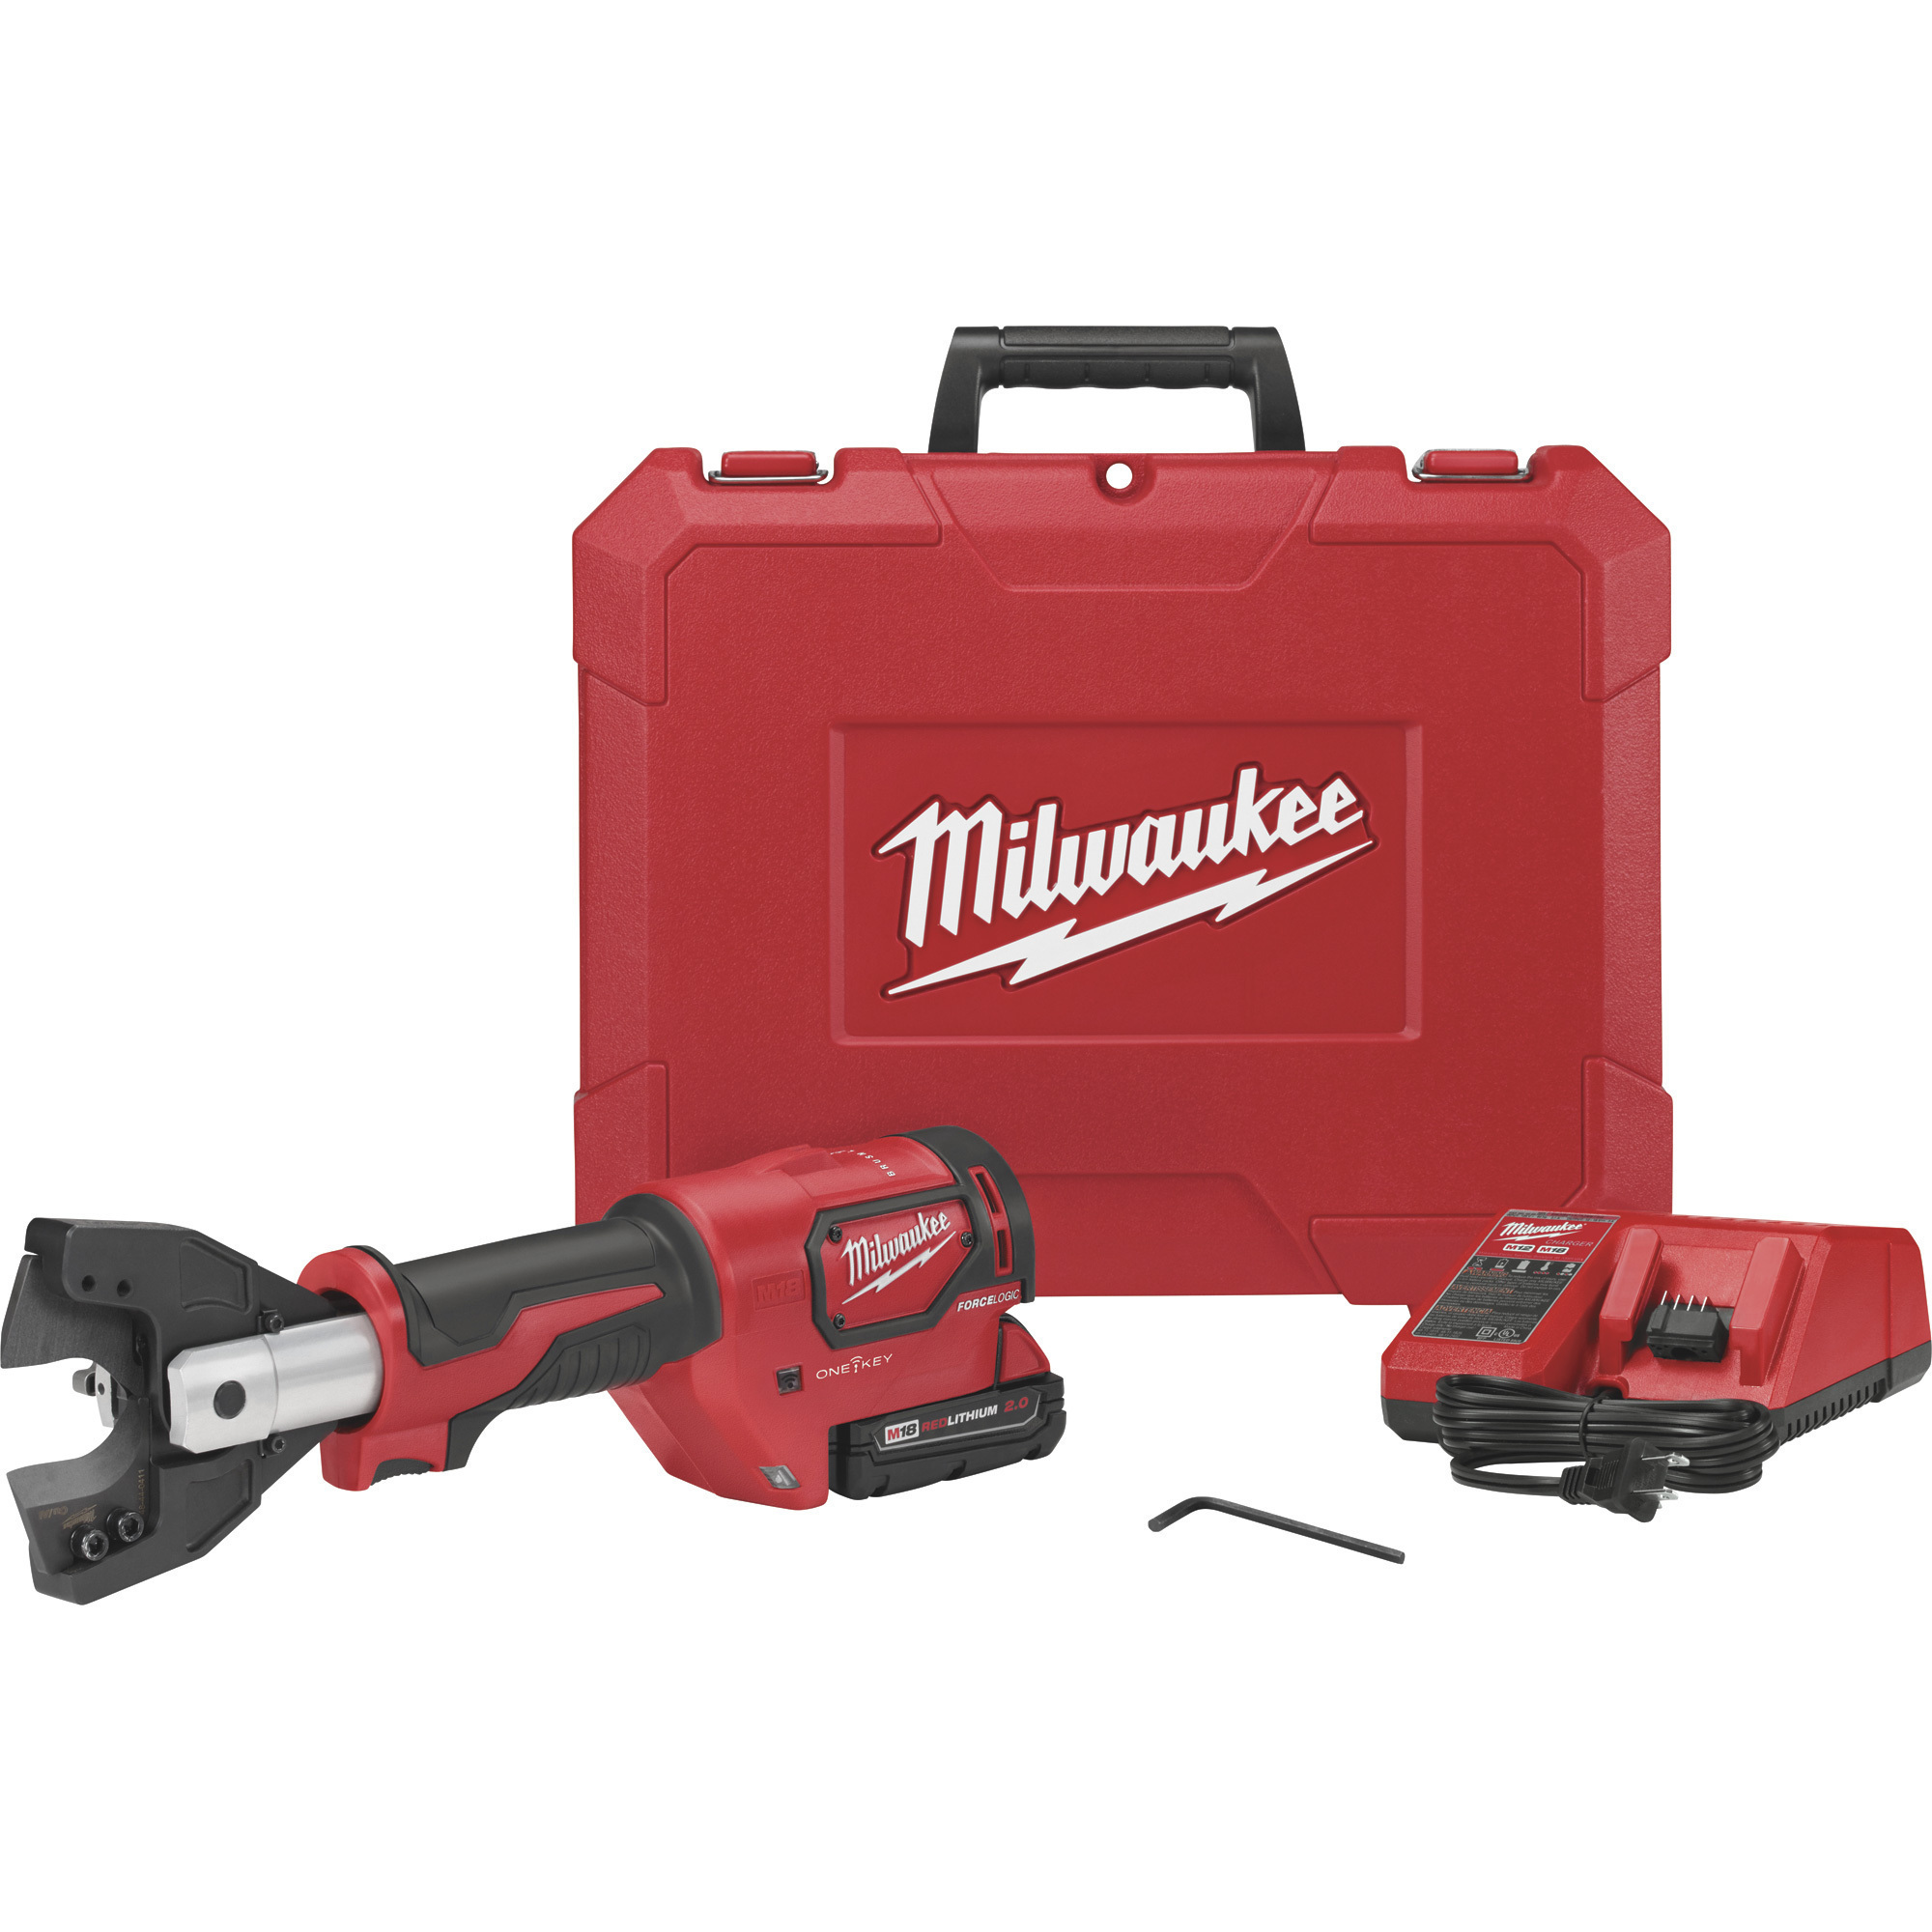 Milwaukee M18 Cordless FORCE LOGIC Cable Cutter Kit with 750 MCM Cu Jaws, 1 Battery, Model 2672-21